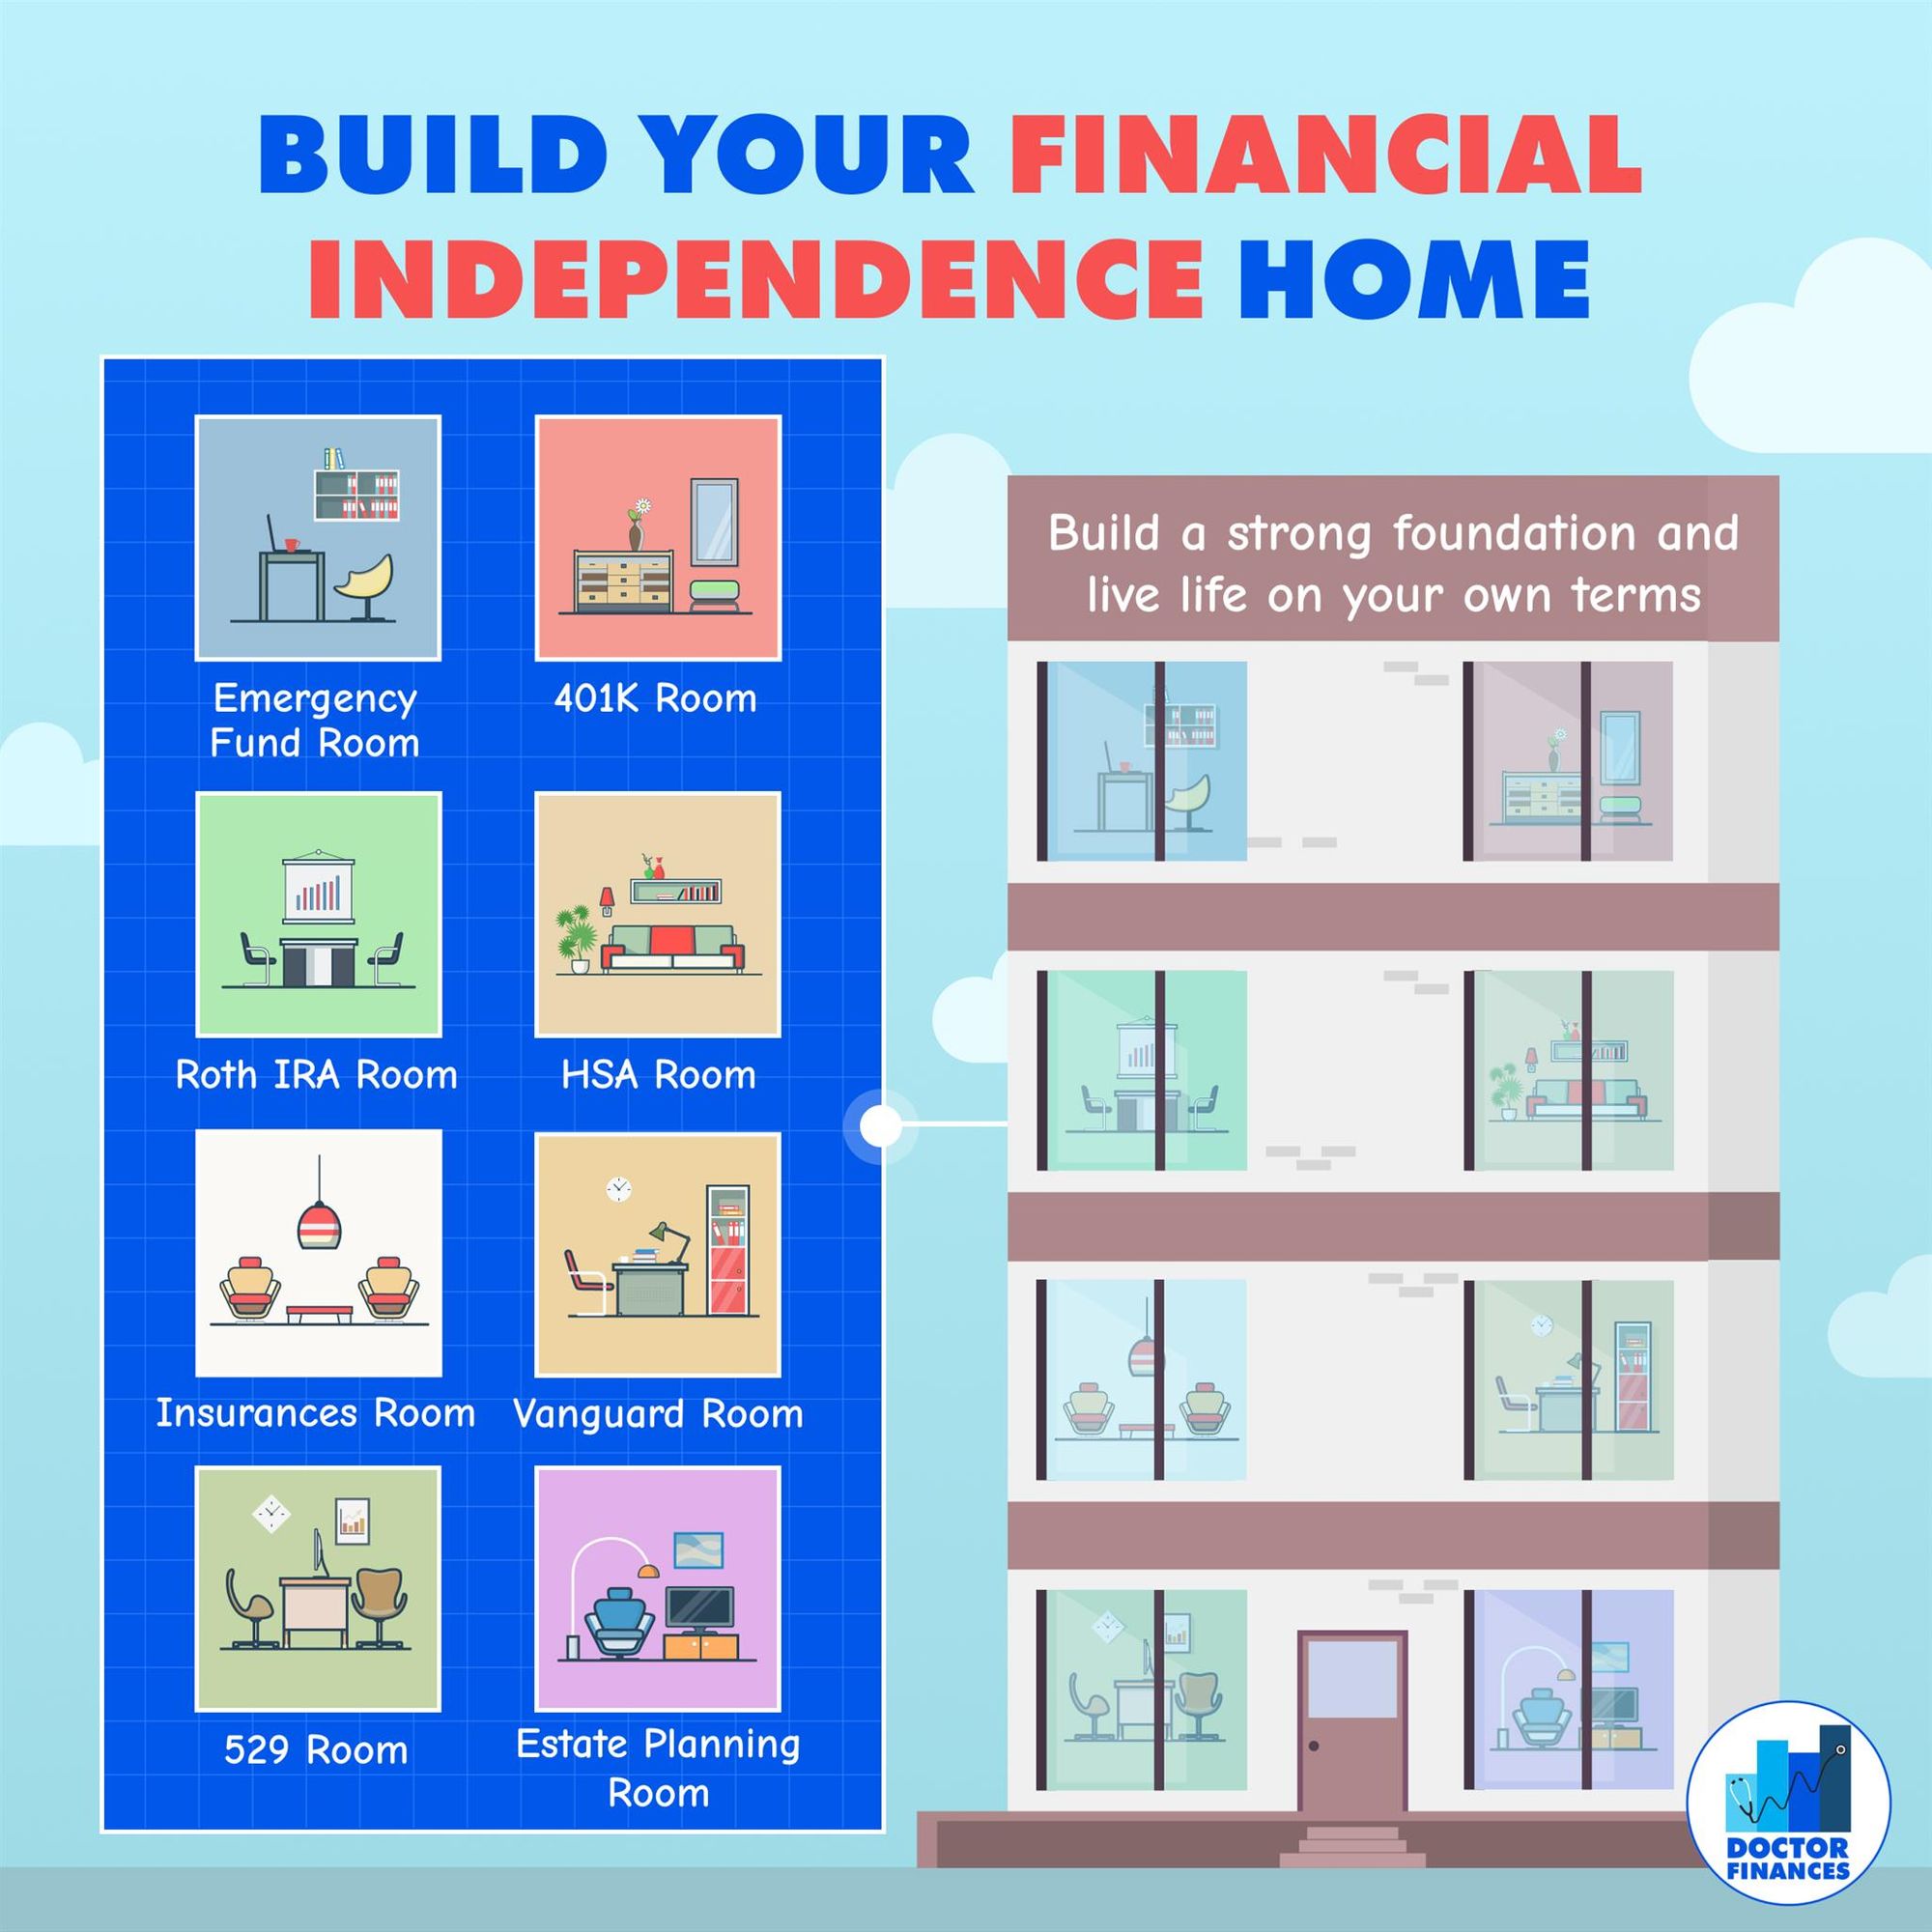 Build Your Financial Independence Home